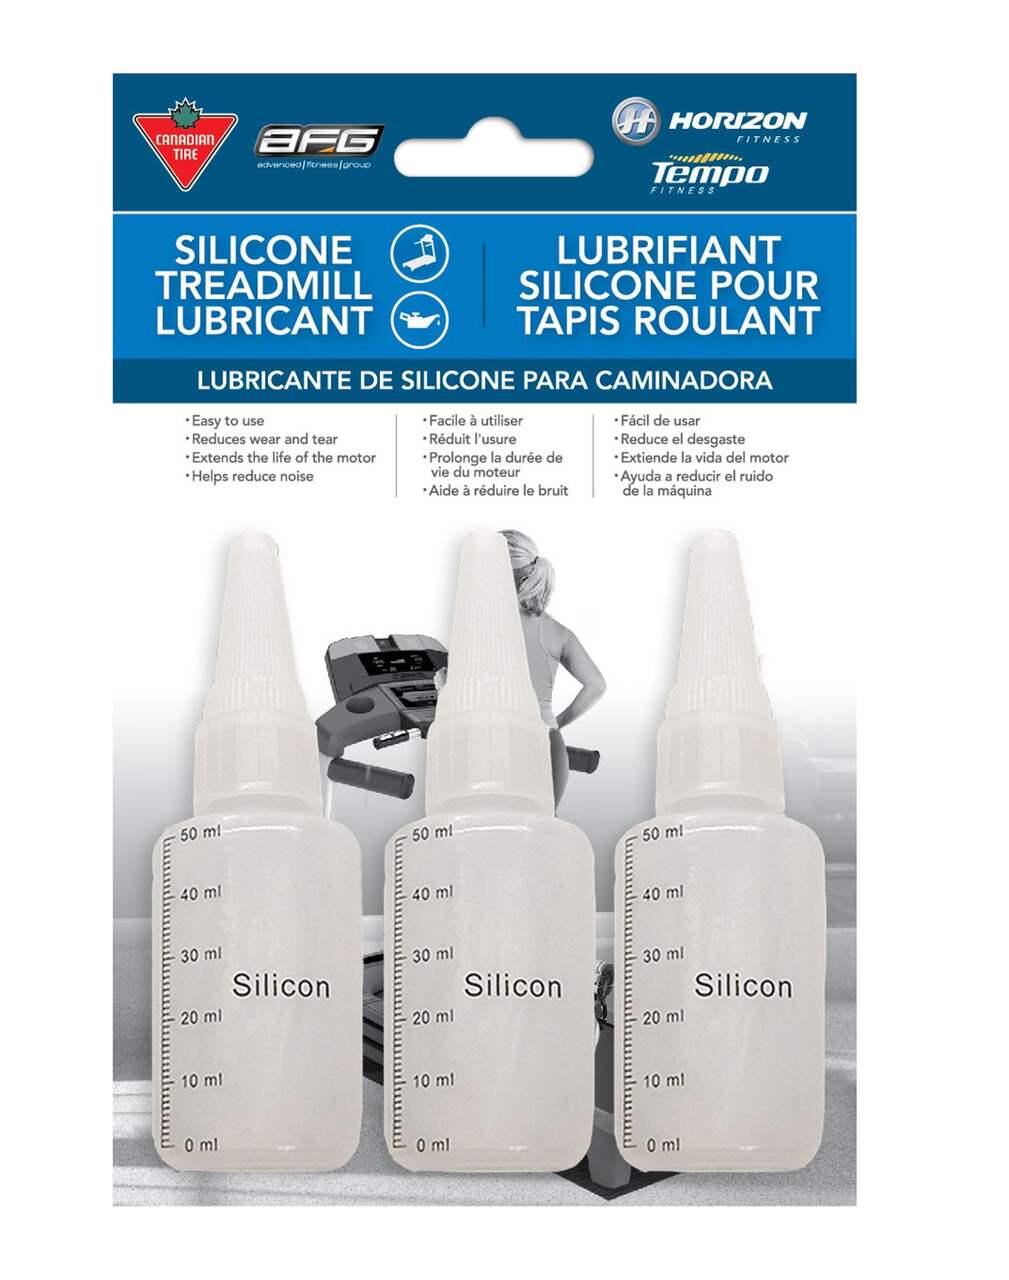 Horizon Silicone Lubricant for Treadmill, 3-pack